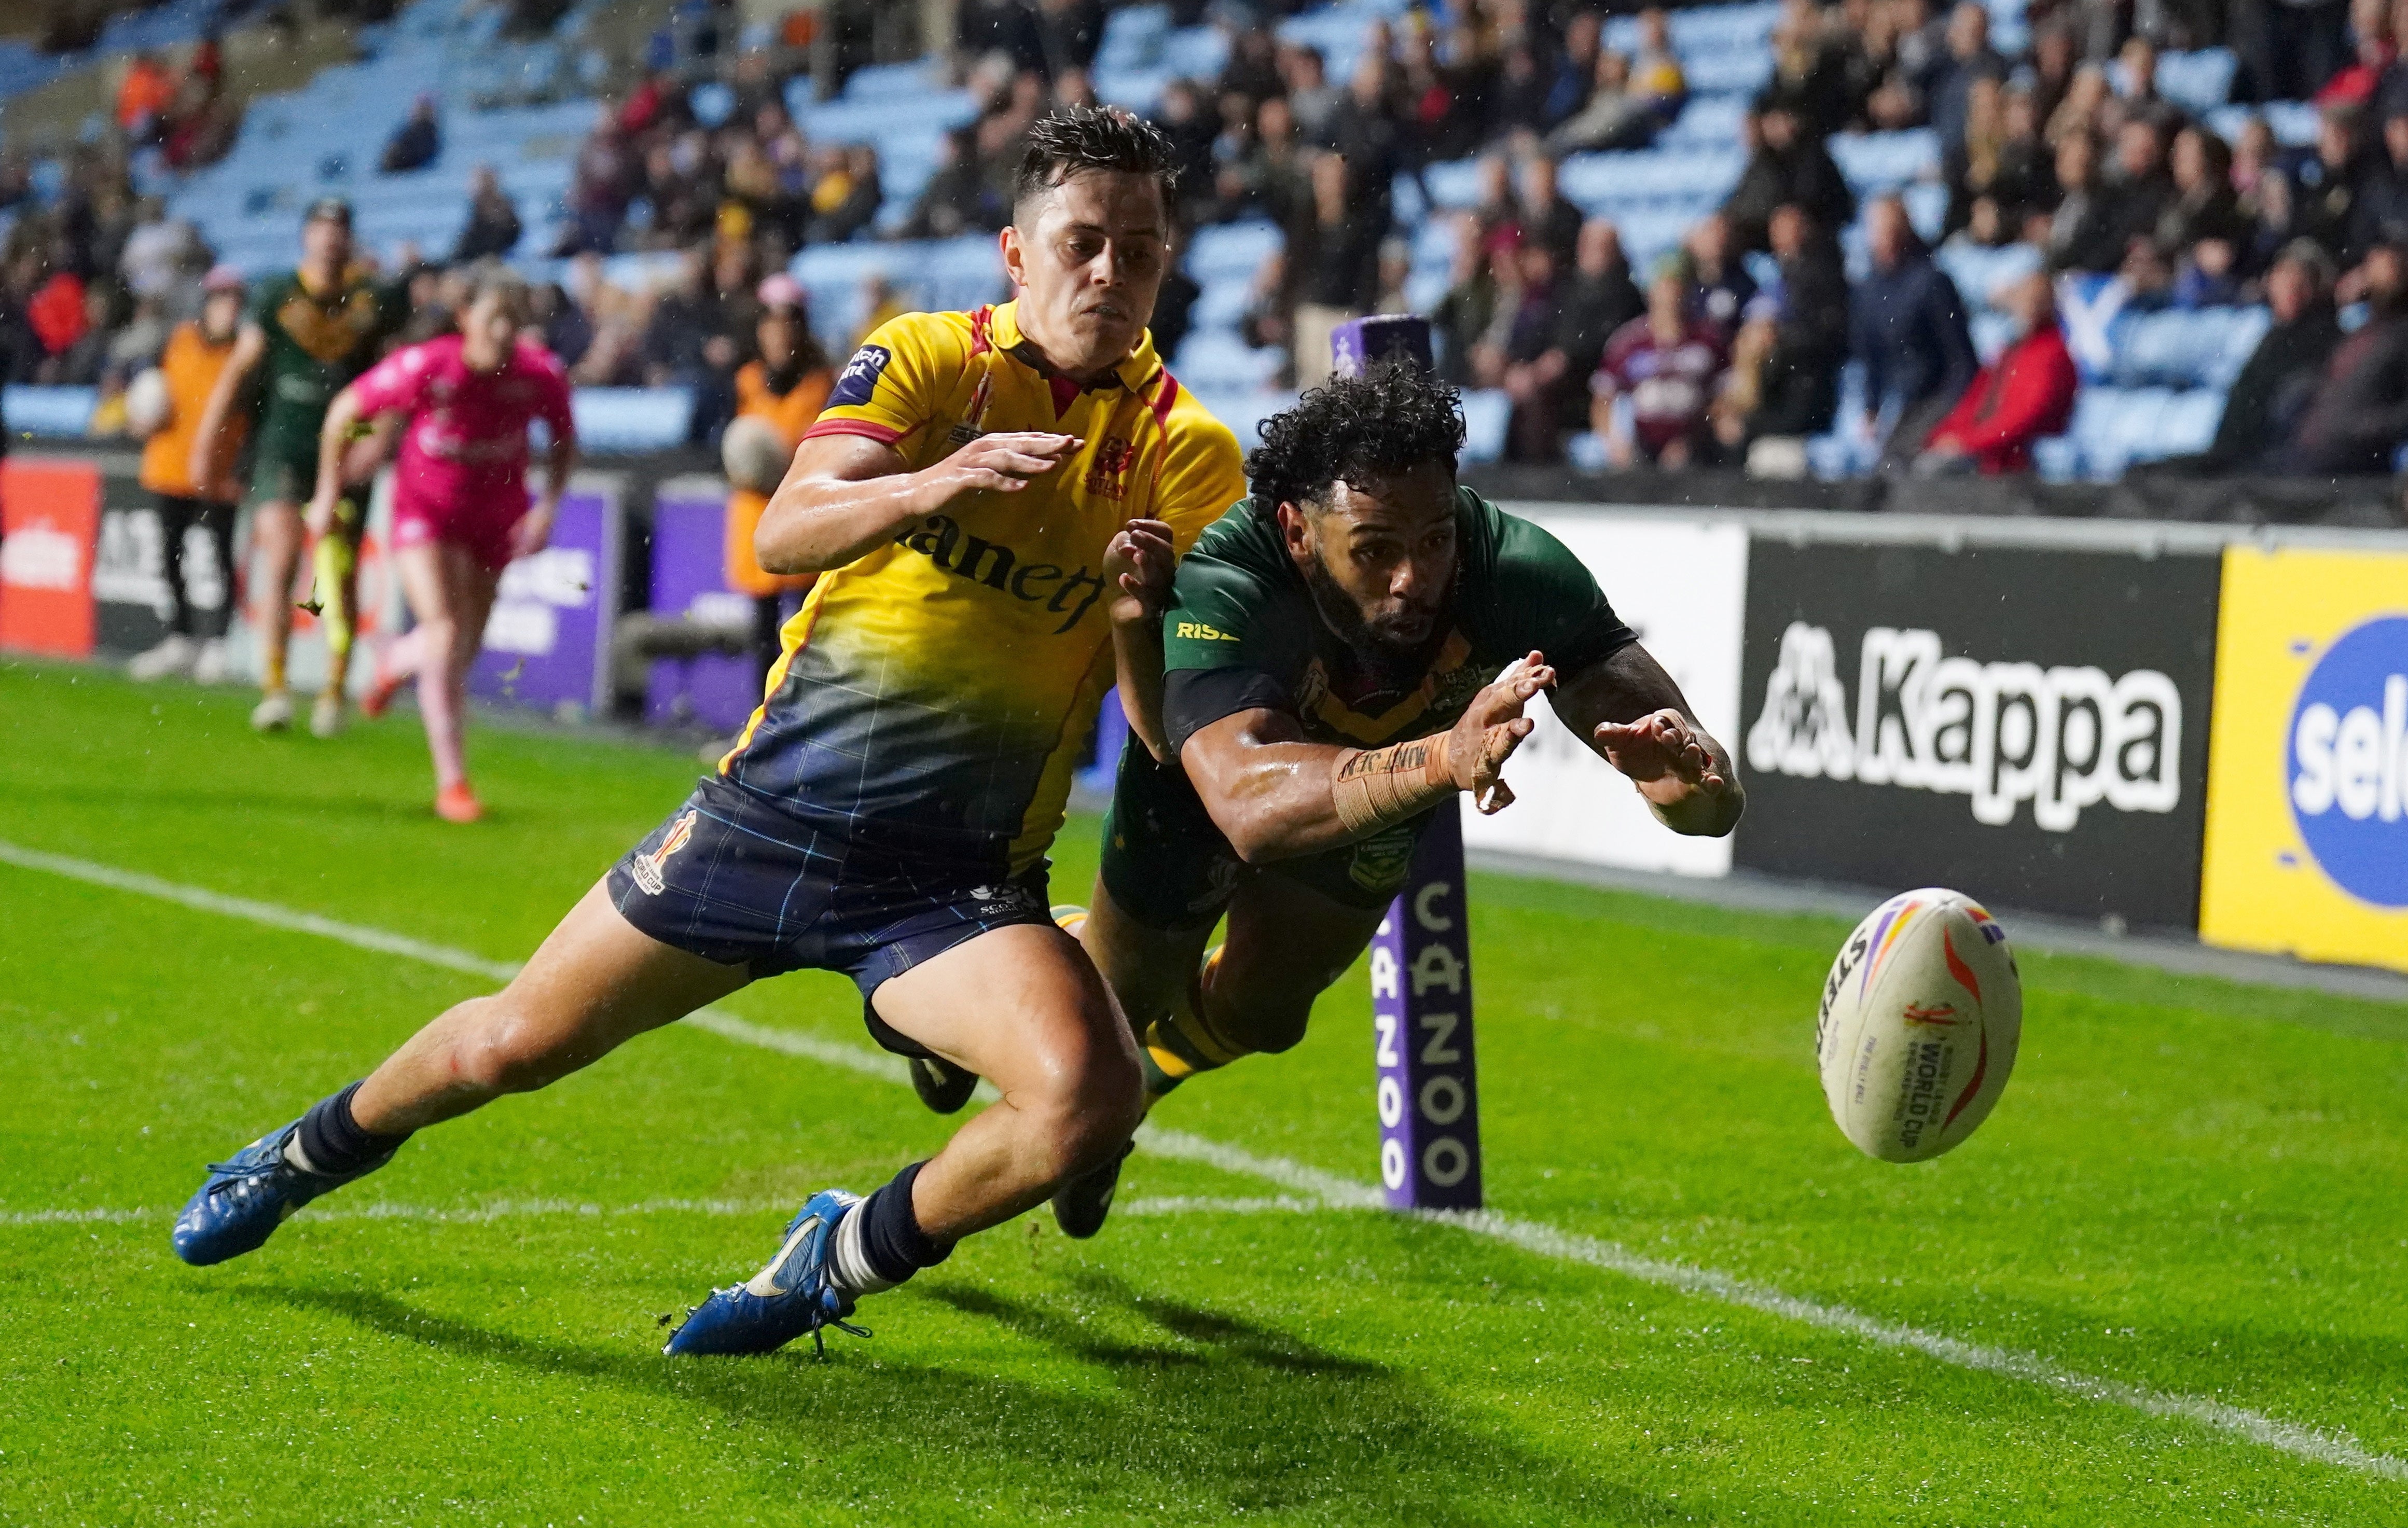 Josh Addo-Carr scored four tries as the tournament holders routed the Scots in Coventry